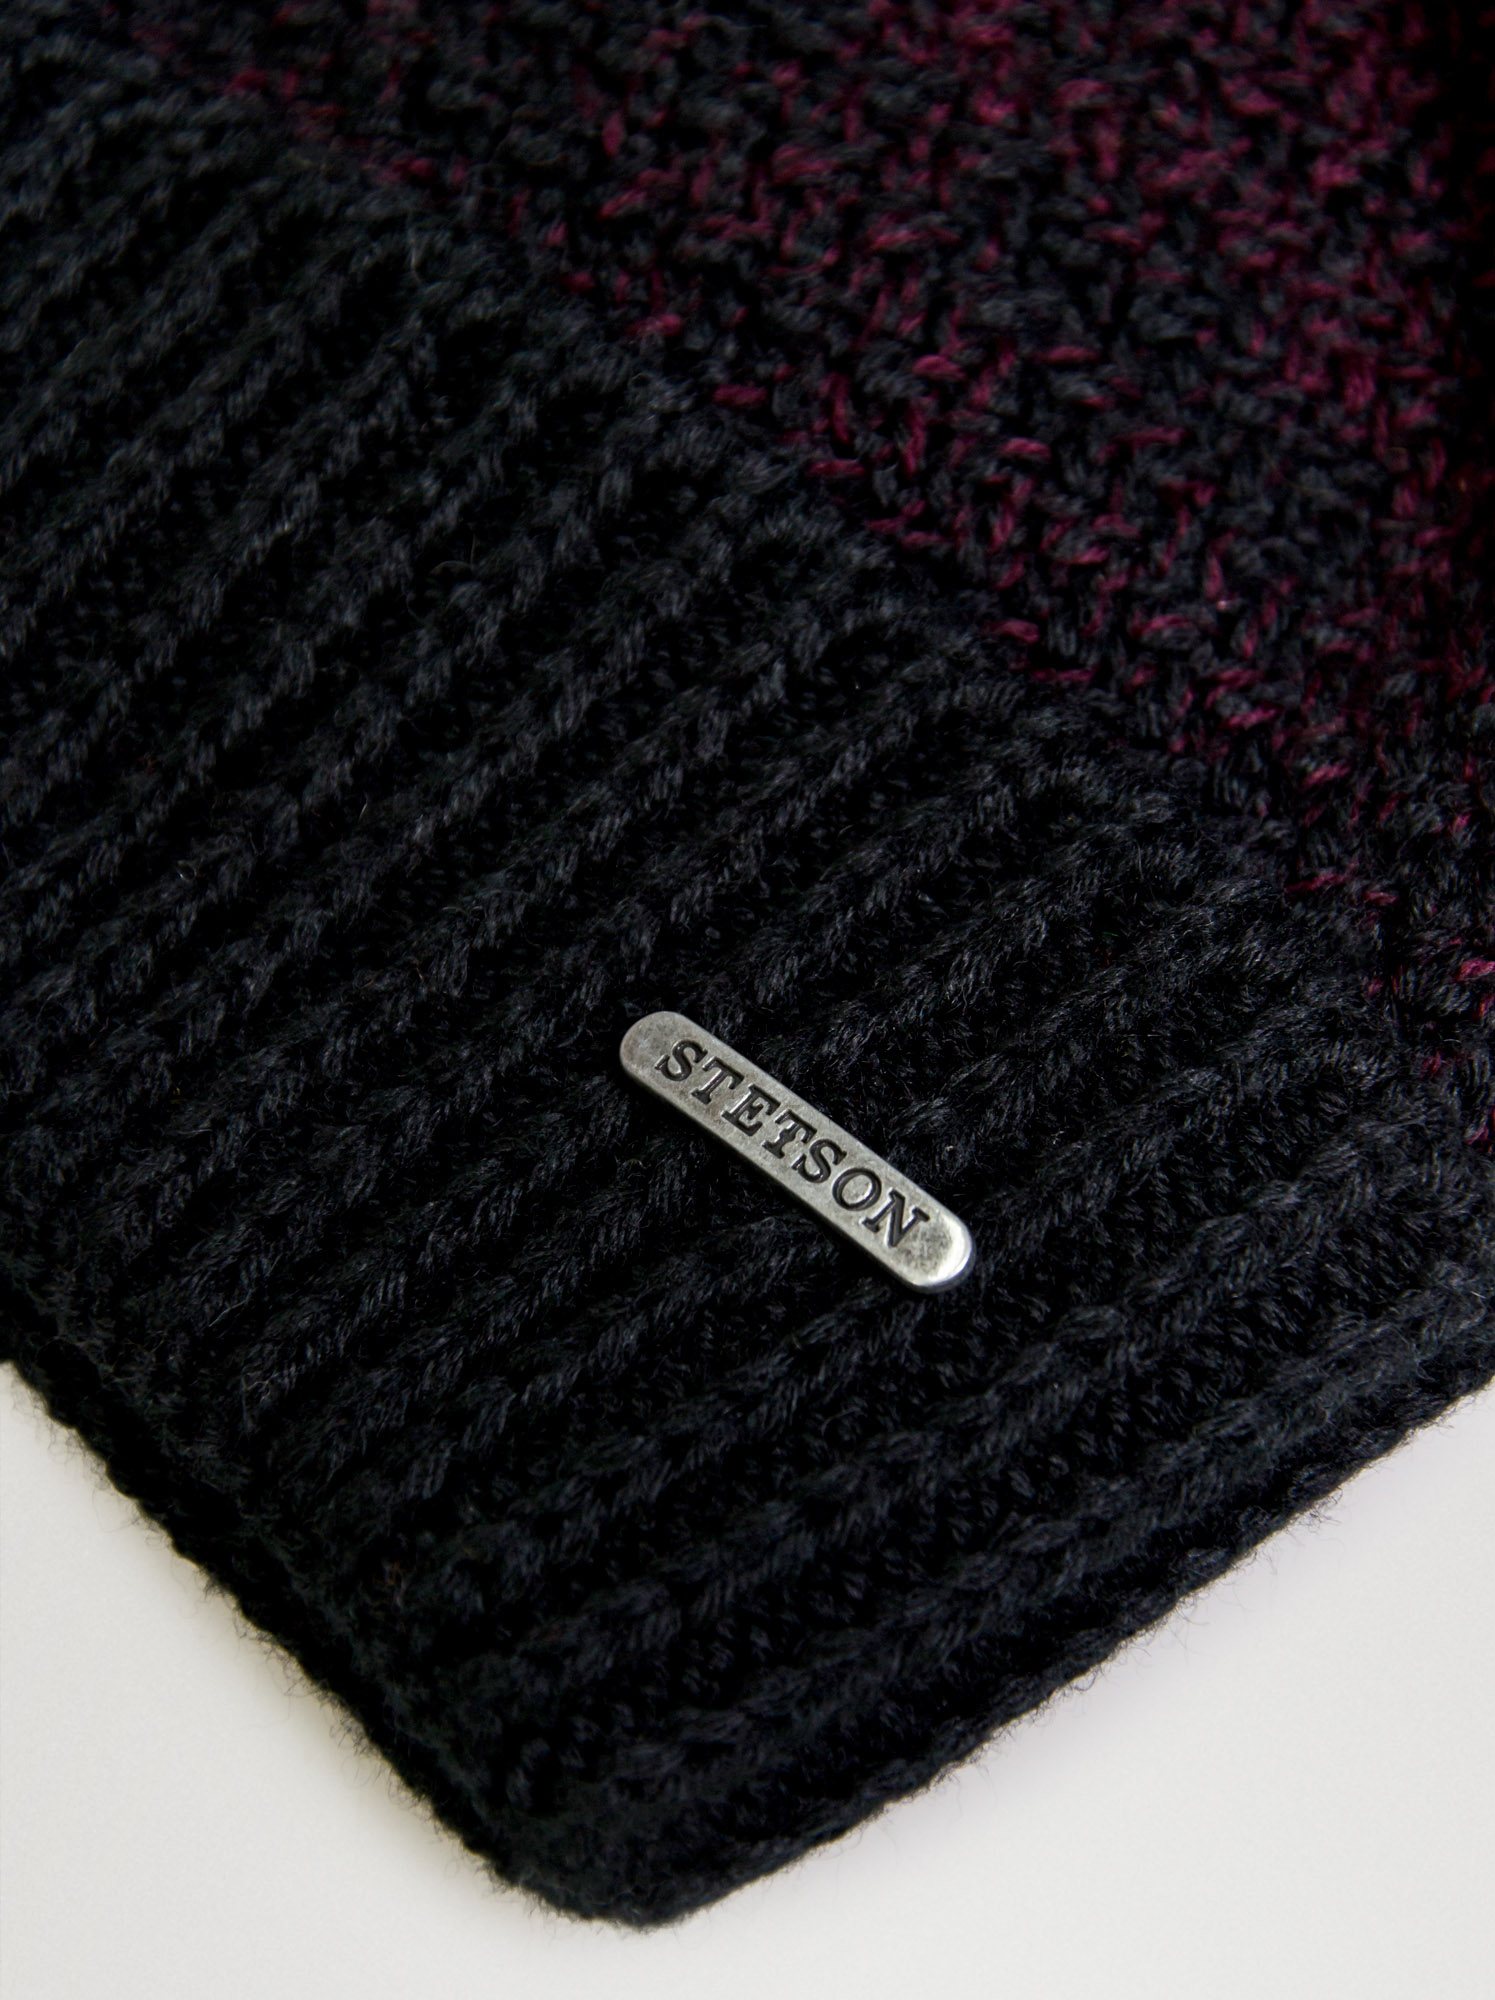 STETSON Beanie hat with wool - Stetson image 3